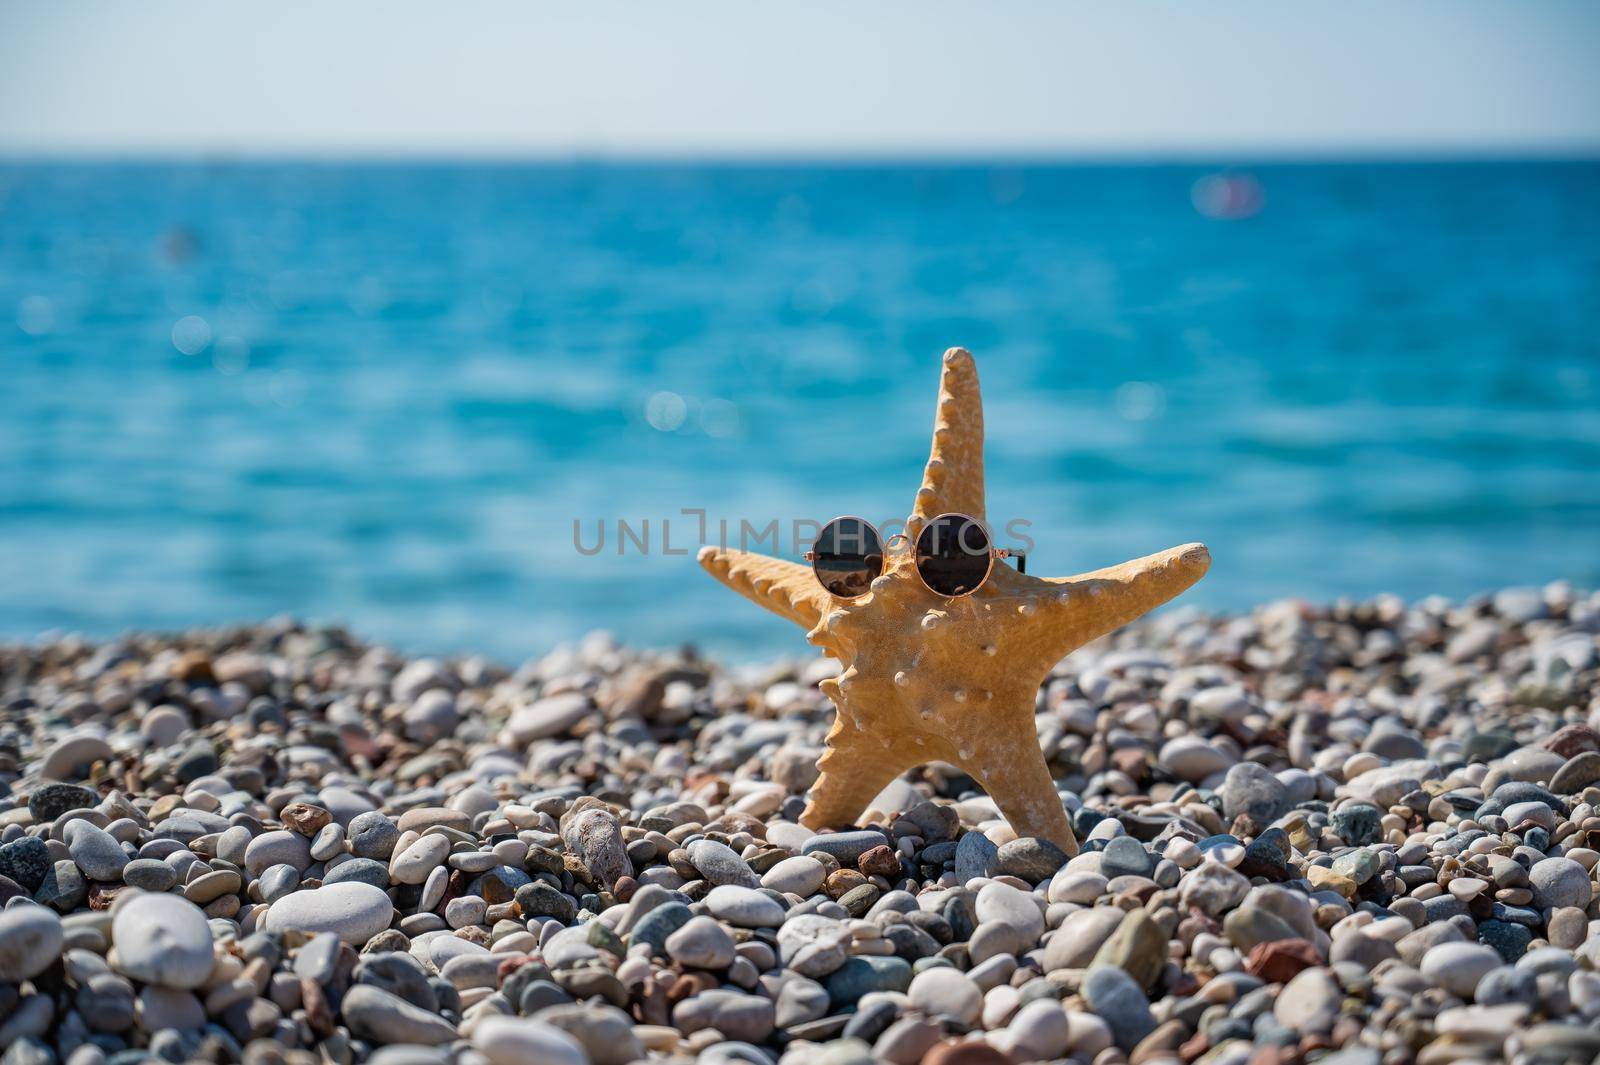 Starfish in sunglasses on a pebble beach by the sea